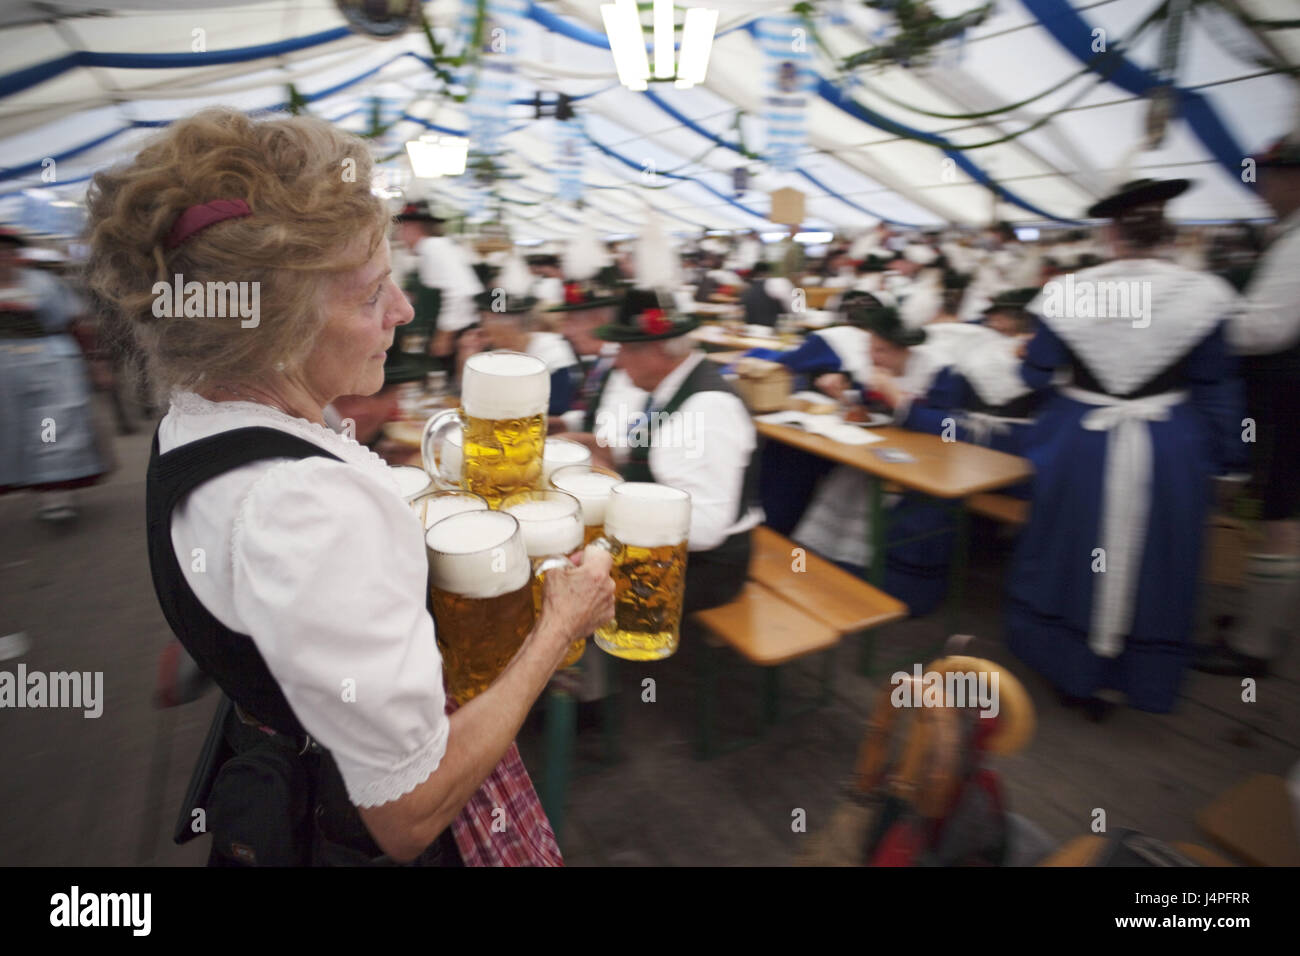 Germany, Bavaria, Munich, October feast, beer tent, service, beer mugs, carry, no model release, Stock Photo